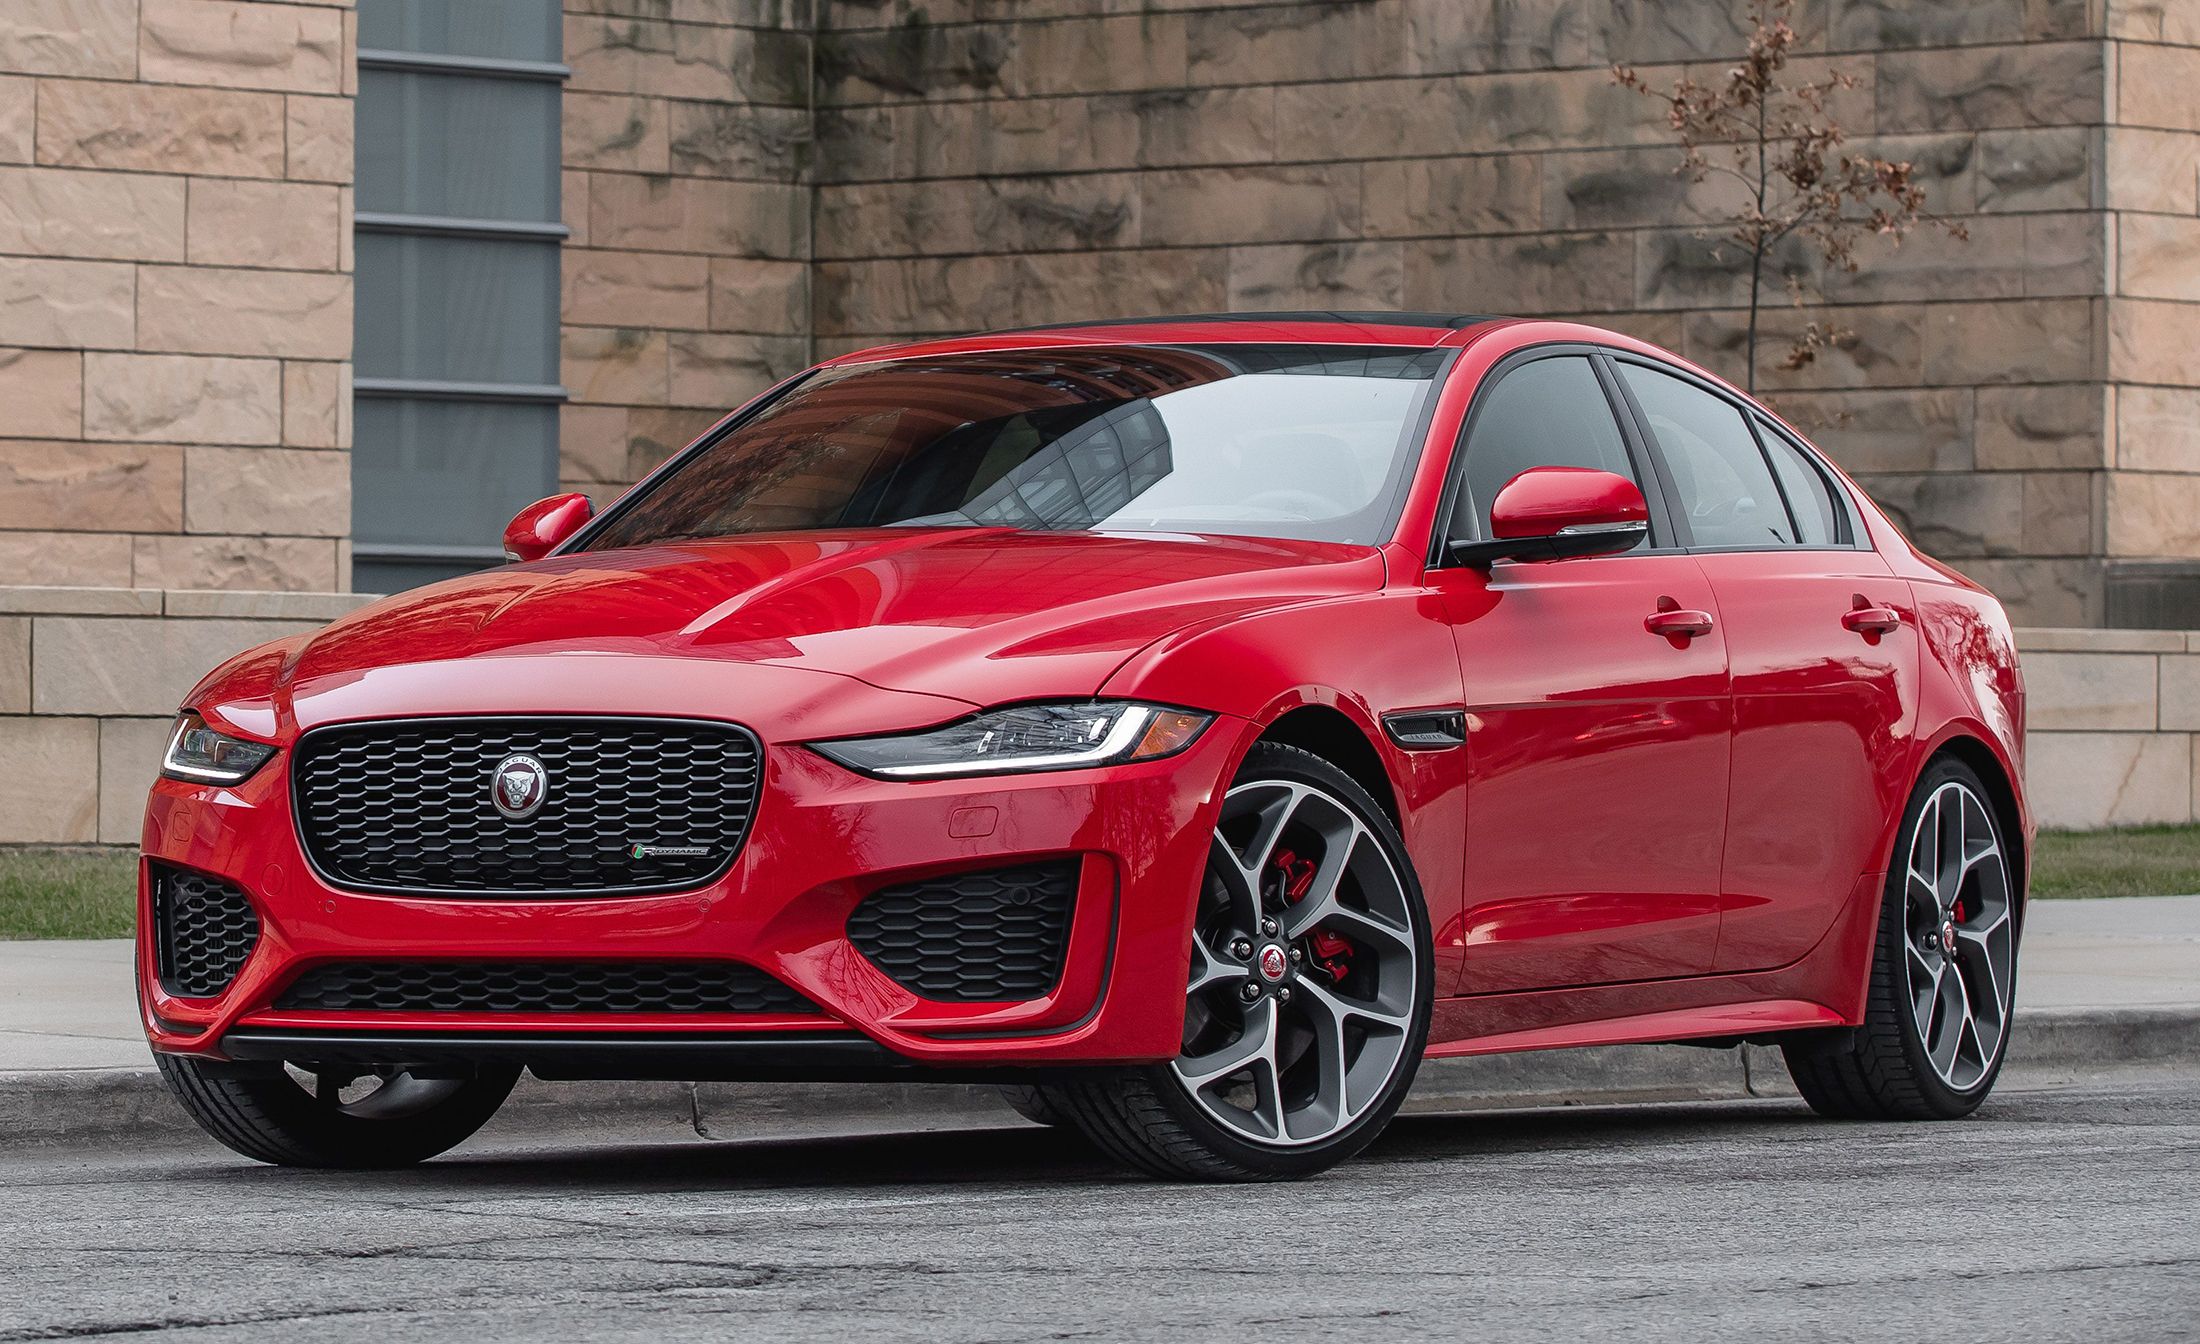 2020 Jaguar XE Review: And Now For Something Completely